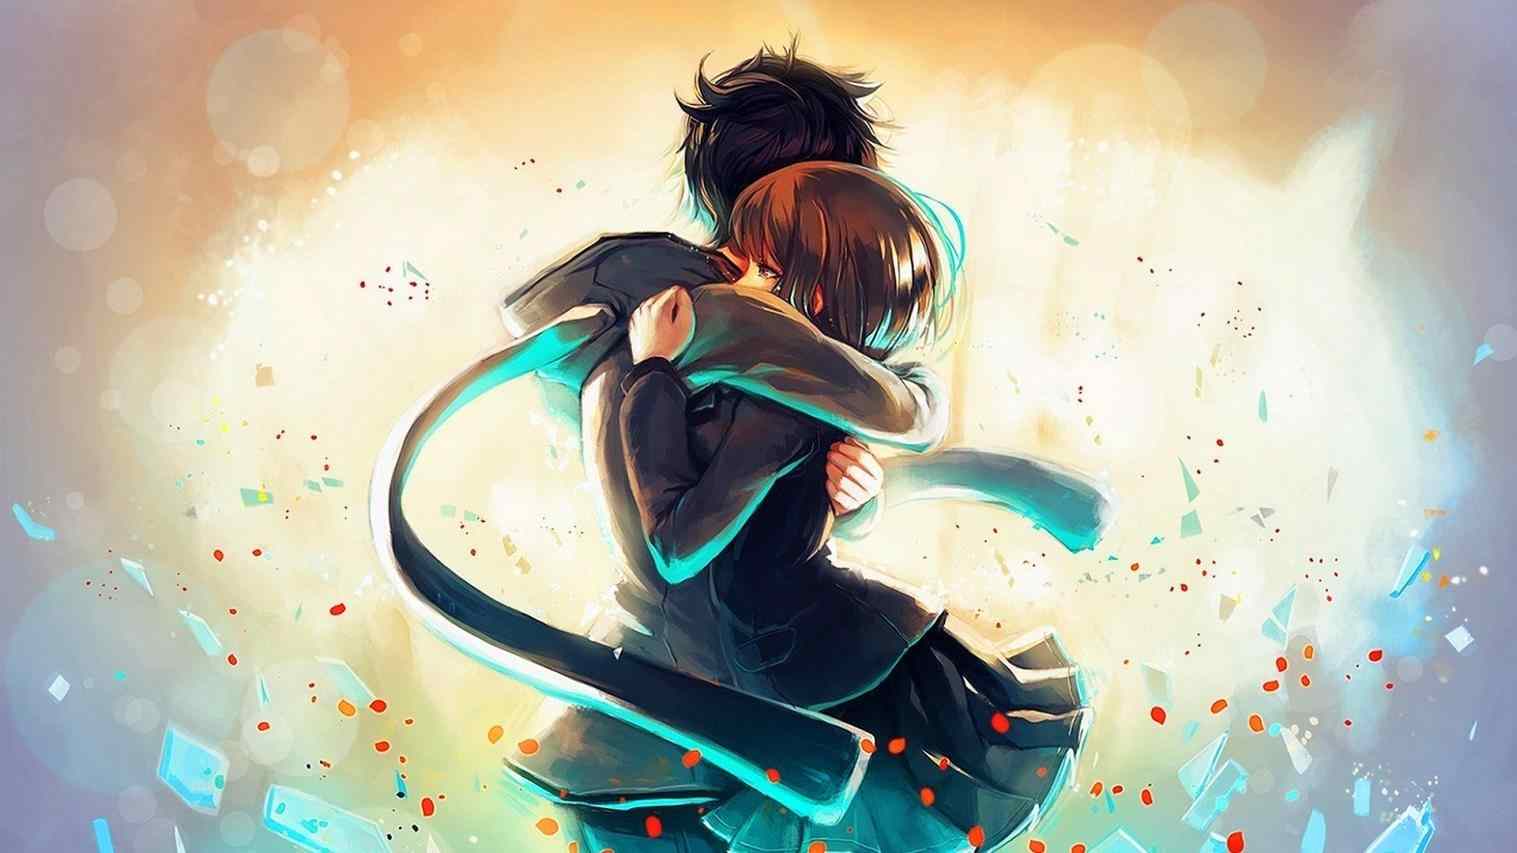 Romantic Anime Wallpapers - Top Free Romantic Anime Backgrounds -  WallpaperAccess